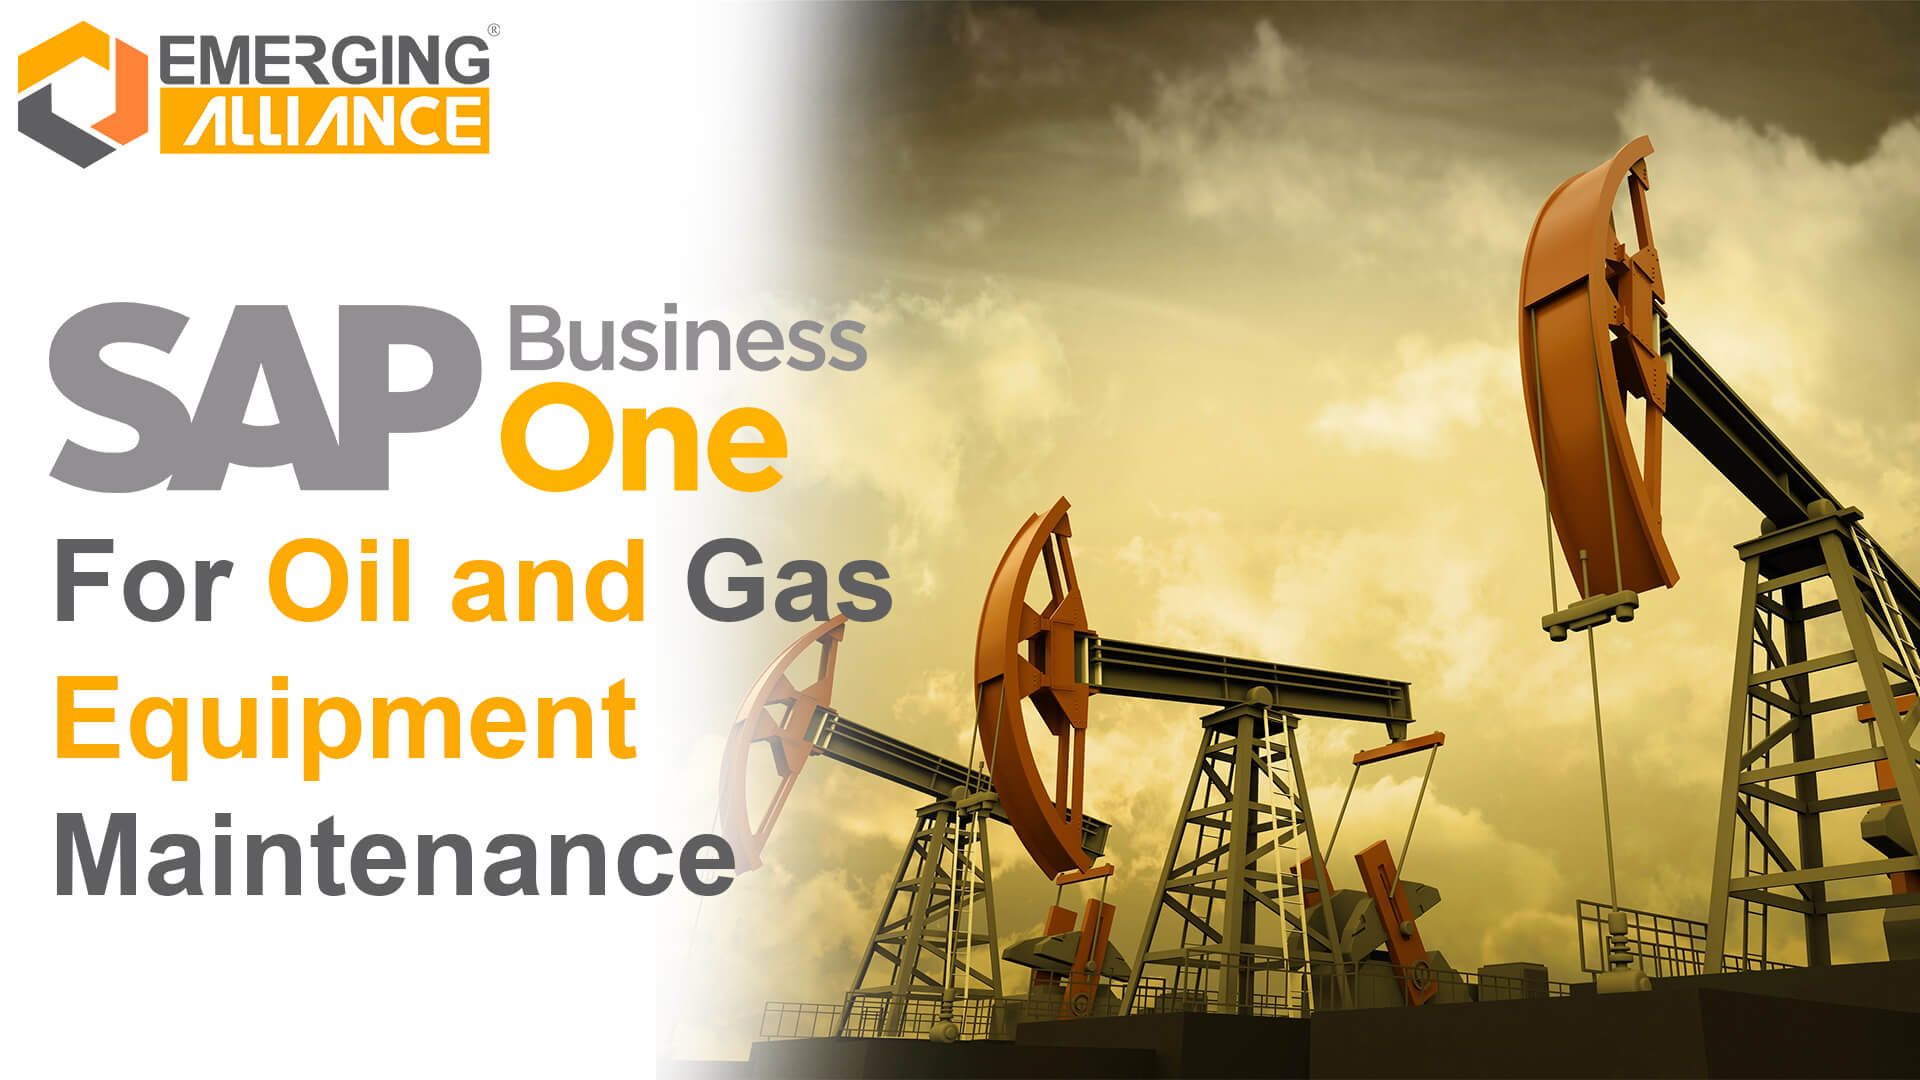 sap business one for oil and gas equipment maintenance